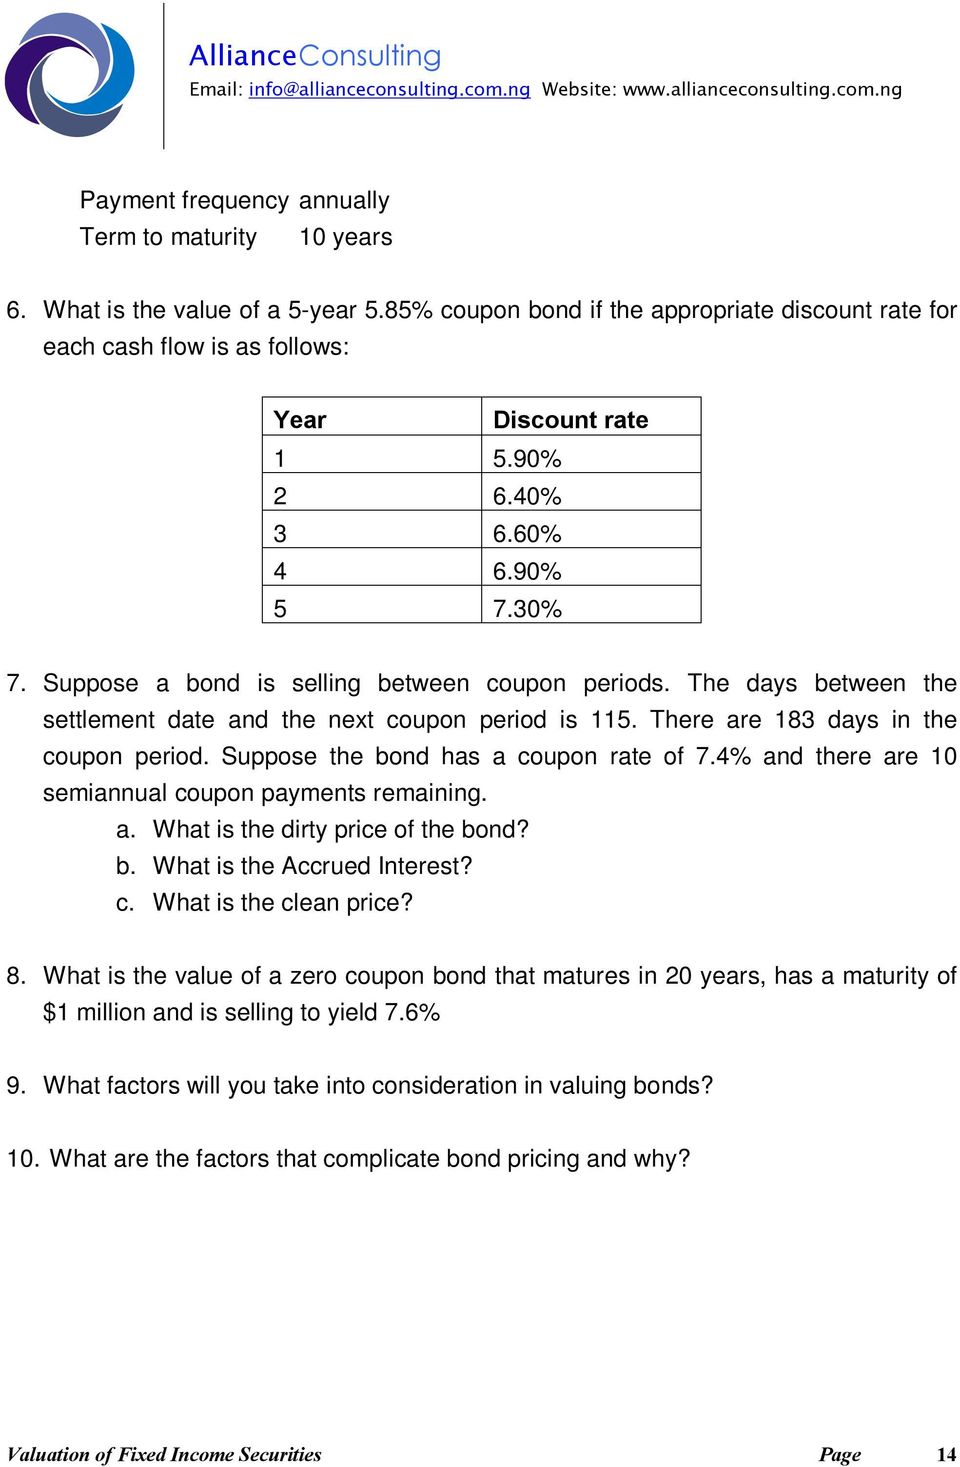 There are 183 days in the coupon period. Suppose the bond has a coupon rate of 7.4% and there are 10 semiannual coupon payments remaining. a. What is the dirty price of the bond? b. What is the Accrued Interest?